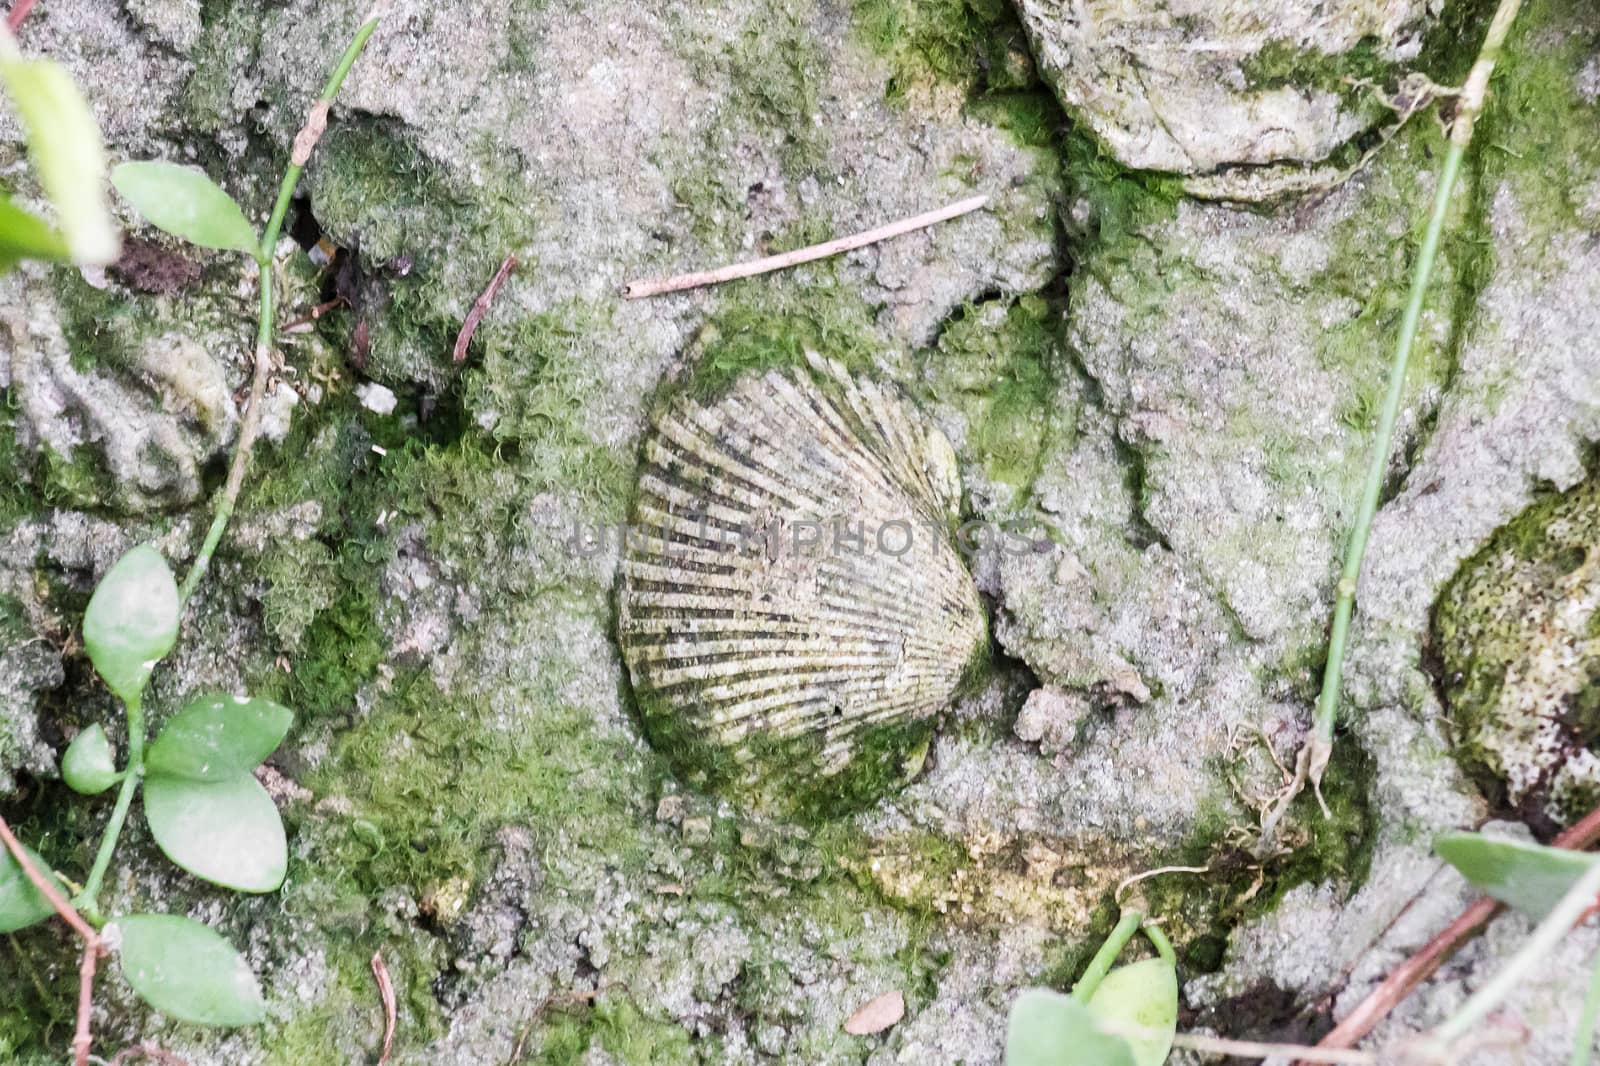 Clam fossil in ground with plants.